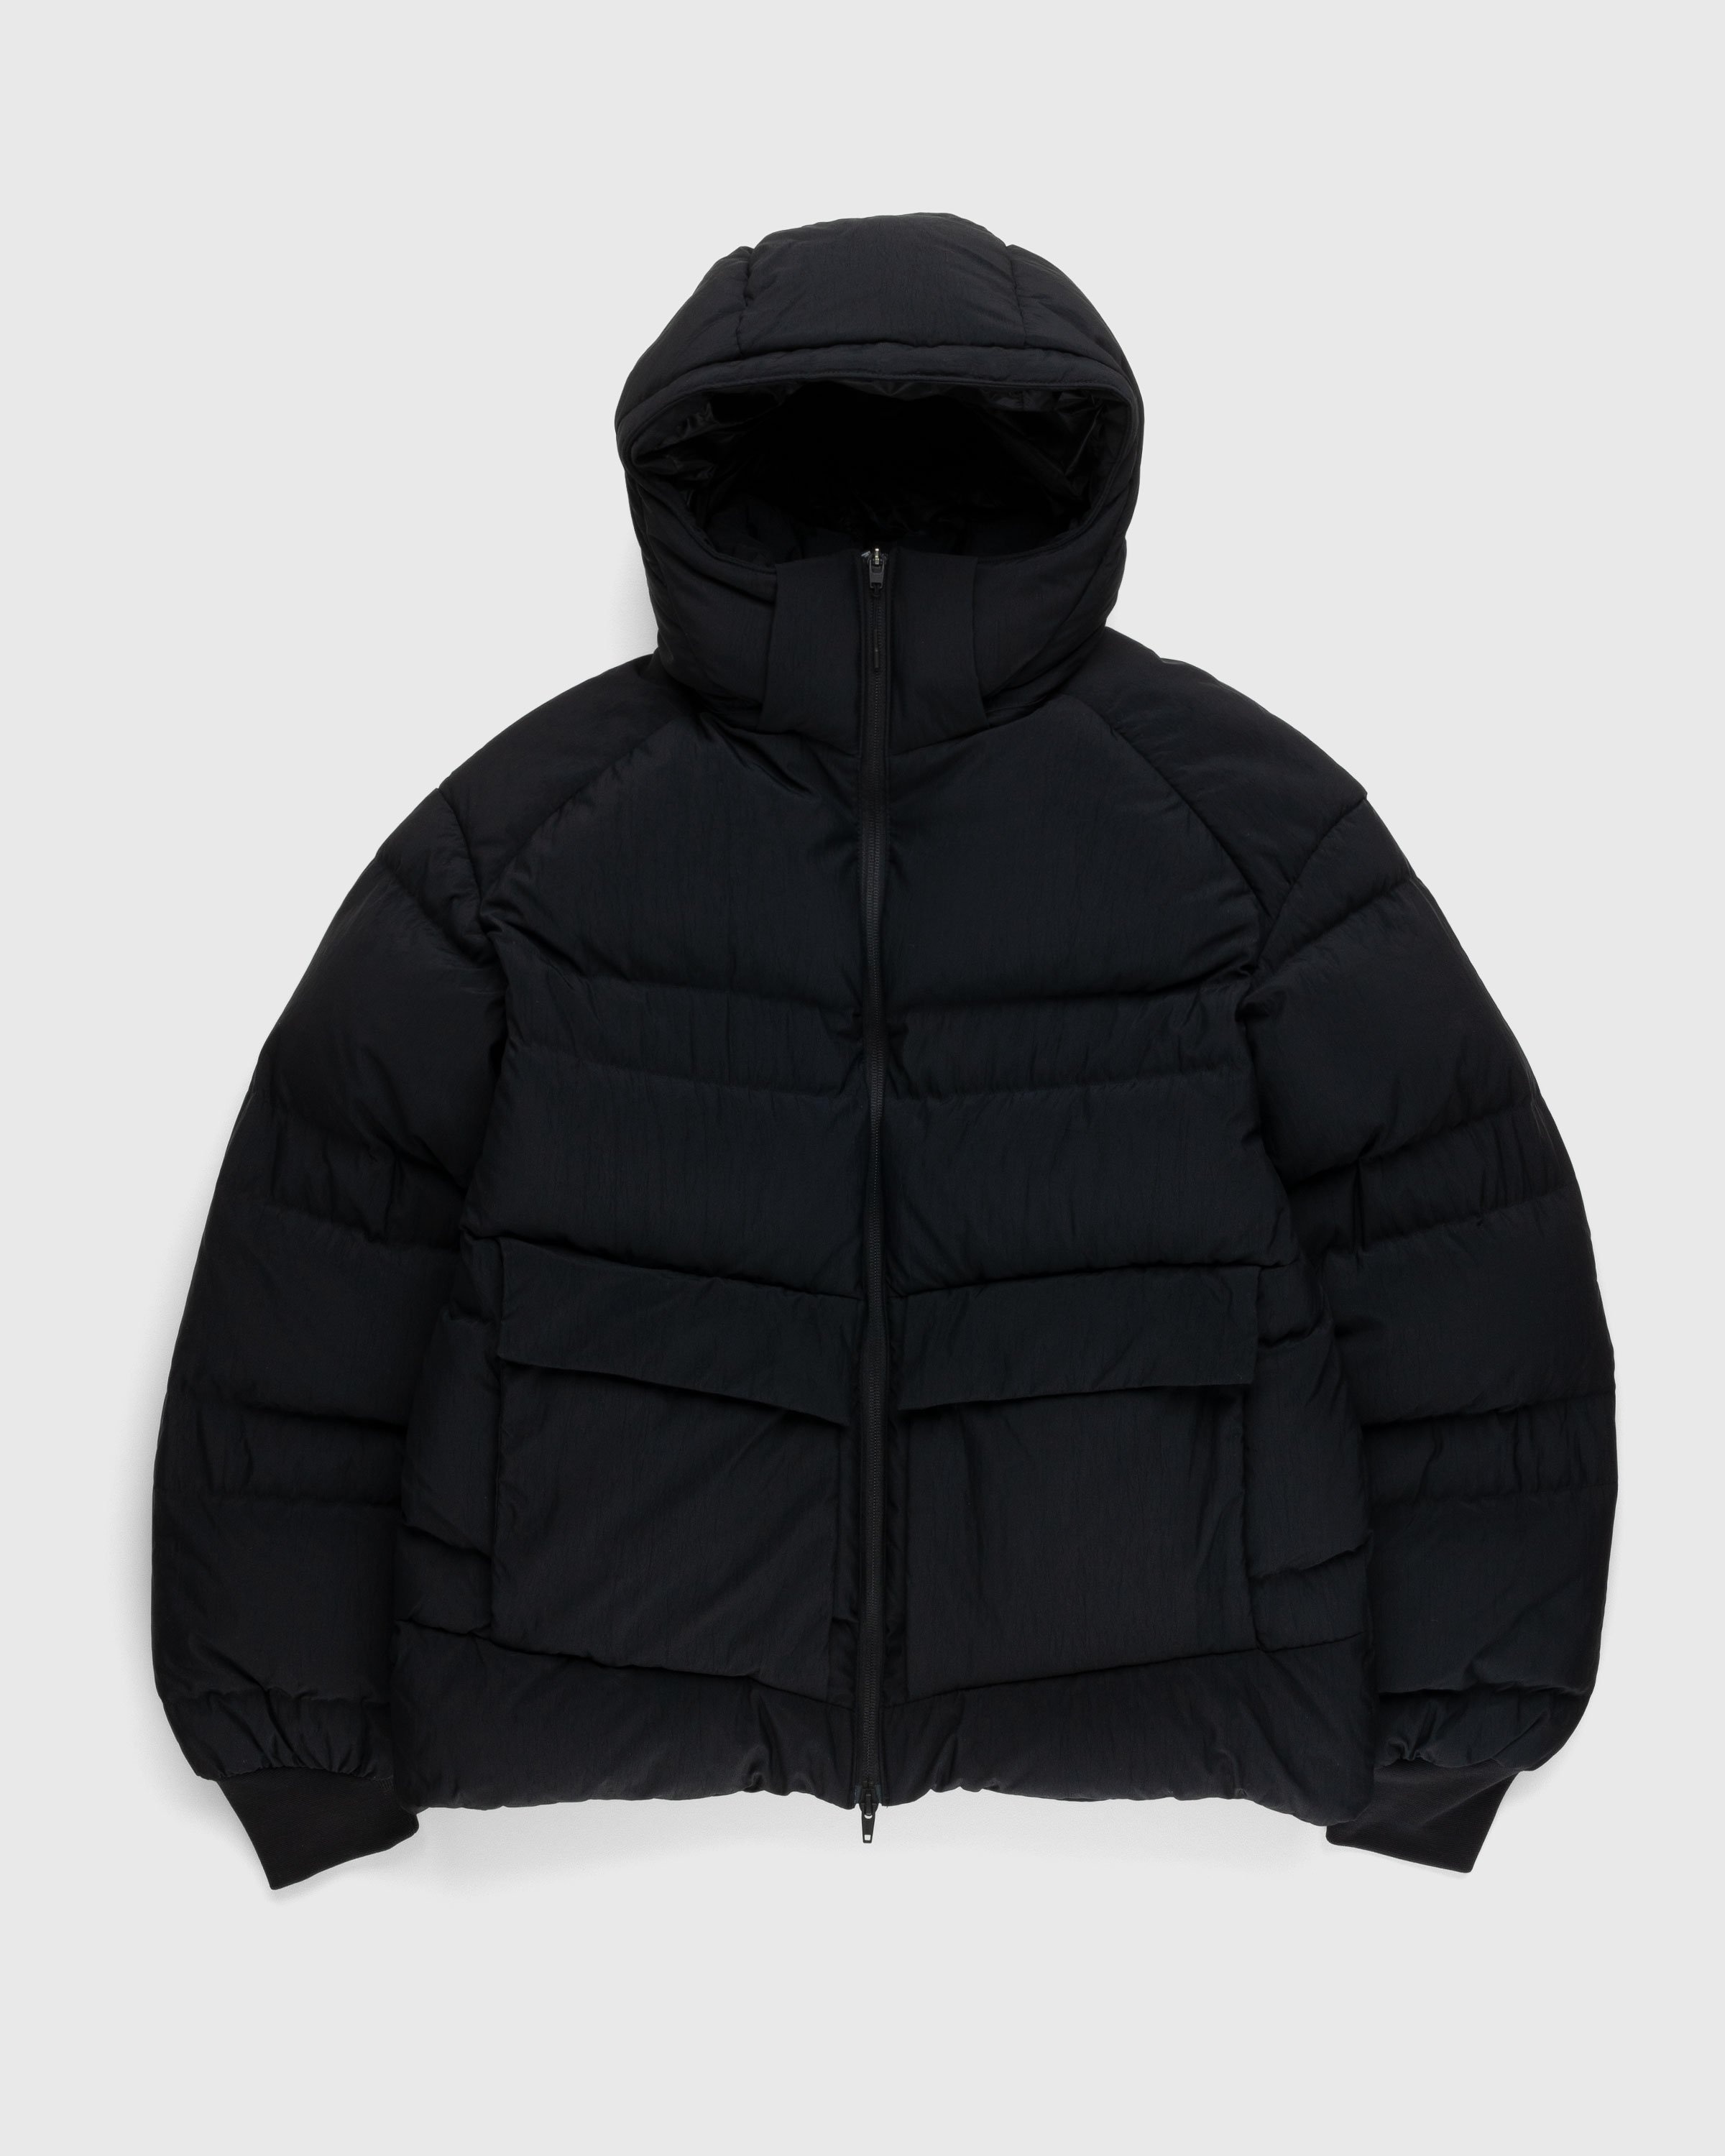 Y-3 – CL Puffer Jacket - Outerwear - Black - Image 1